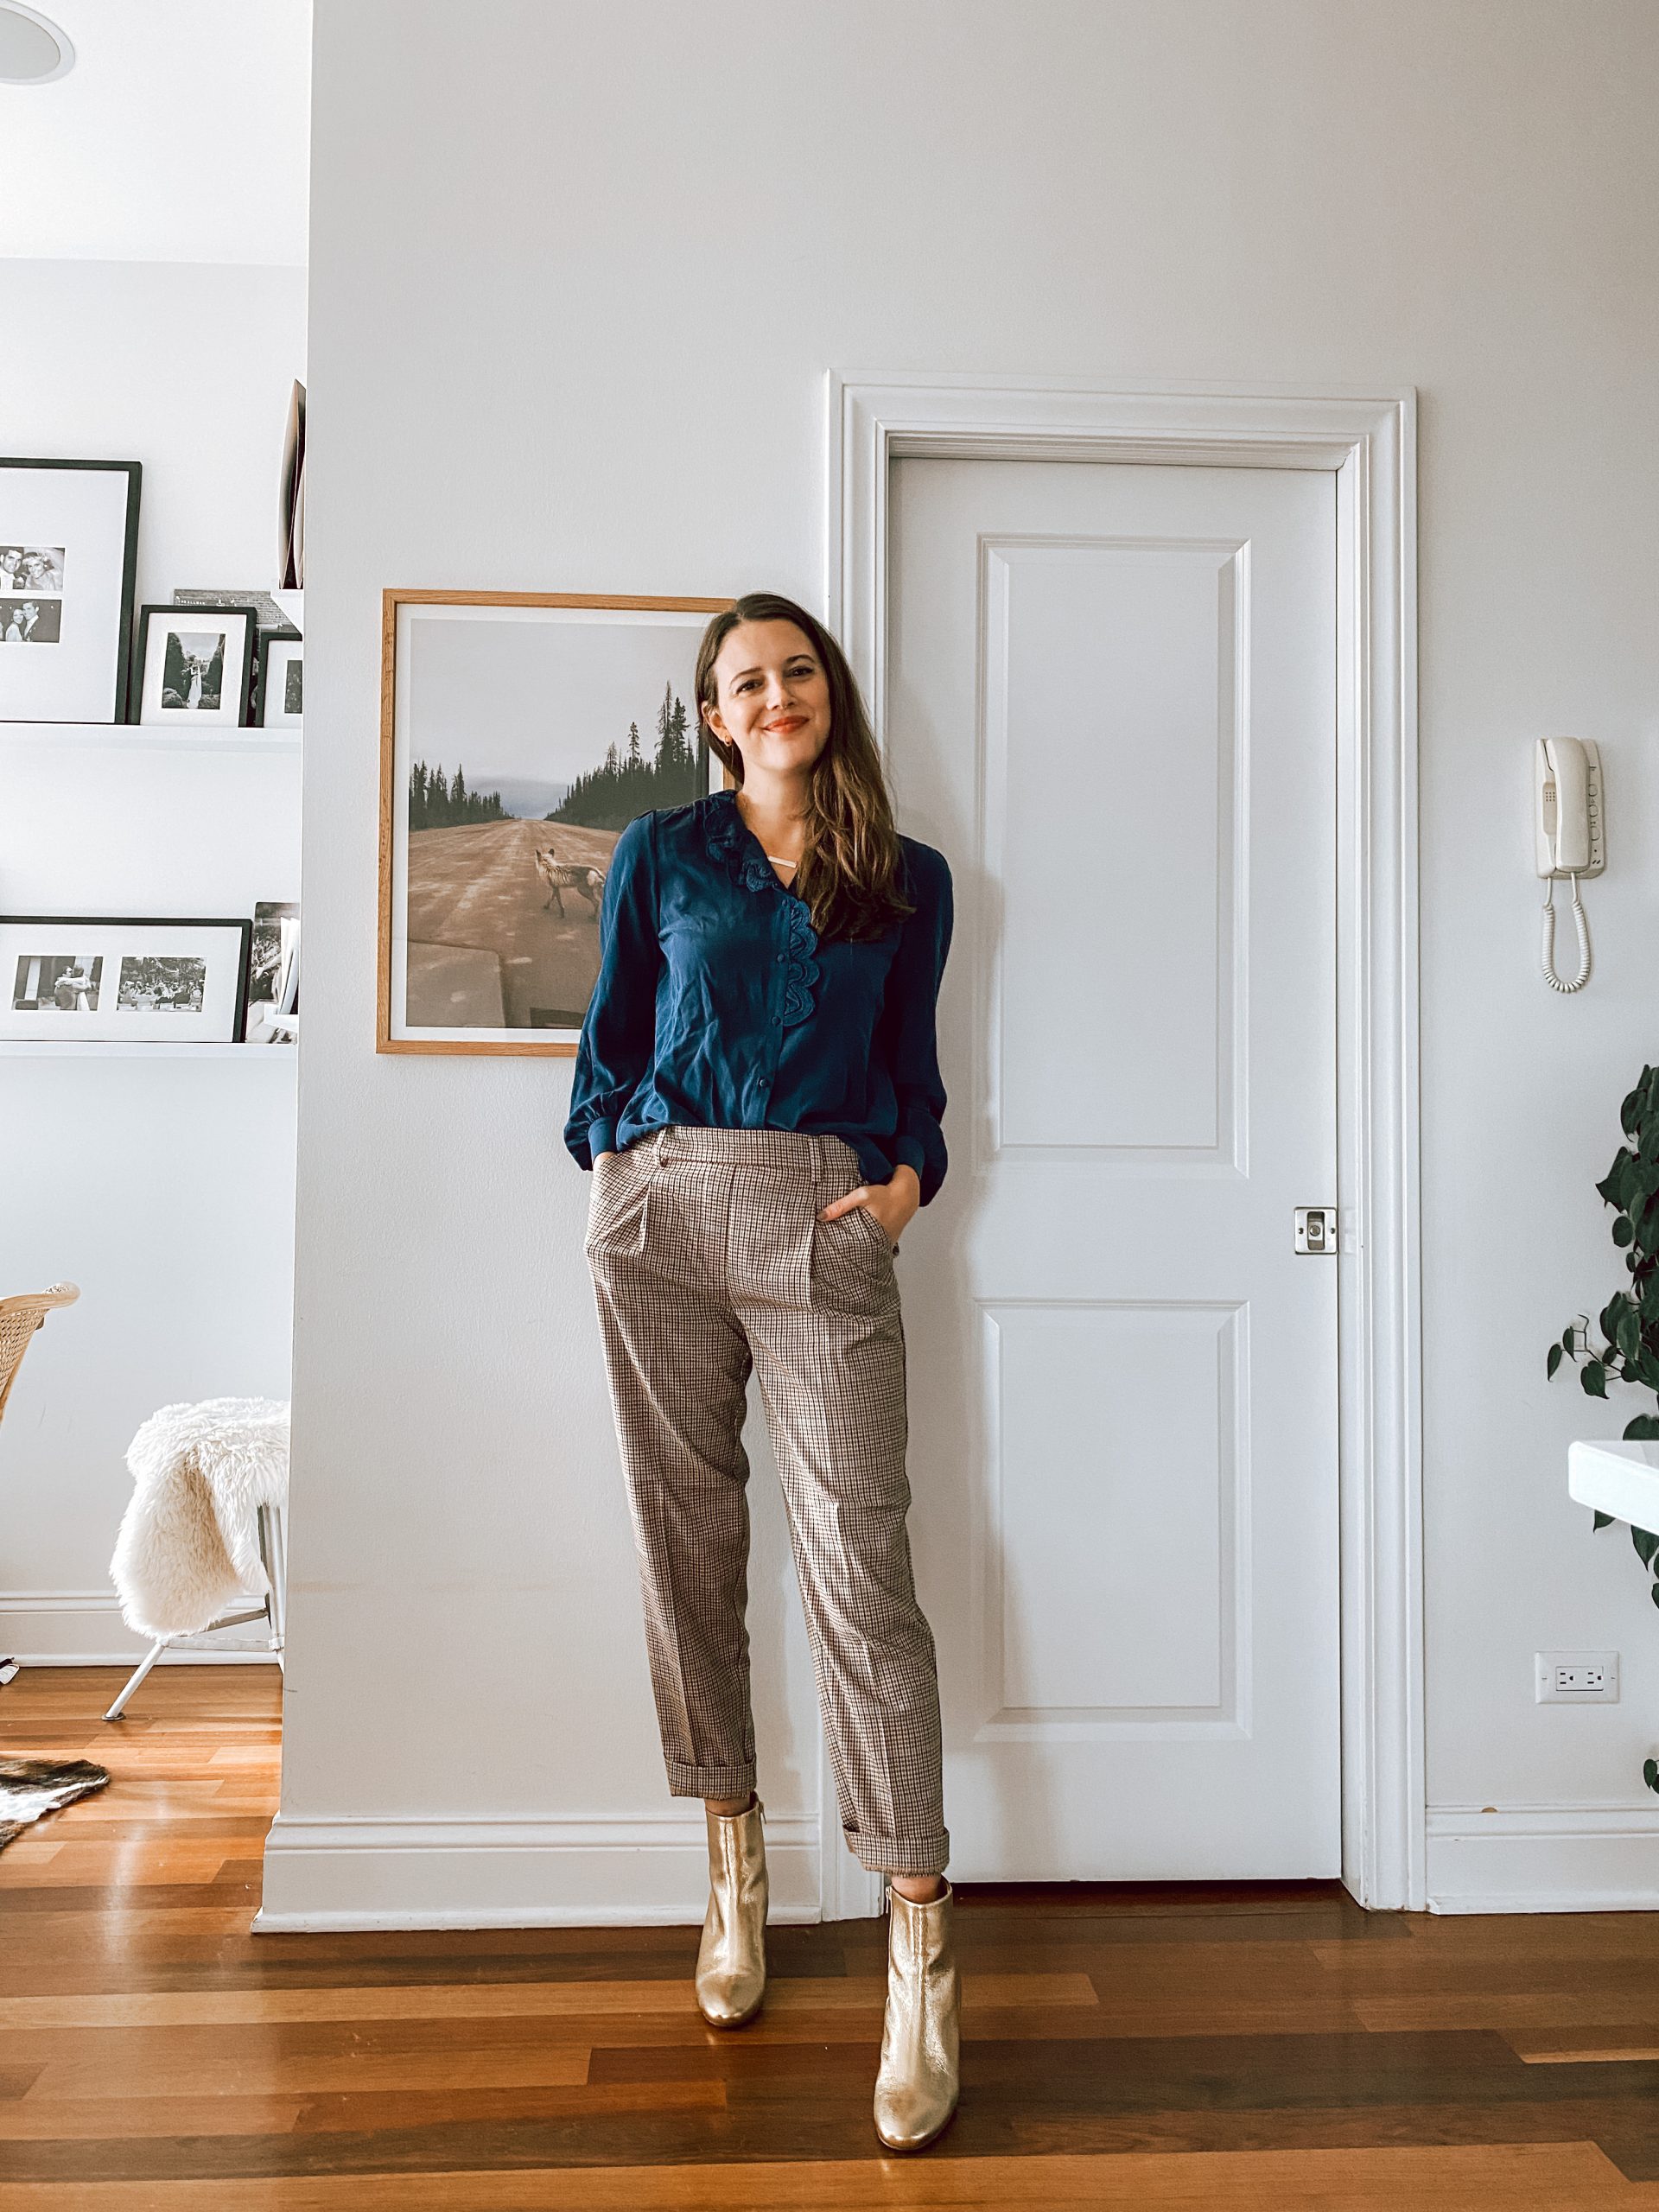 How to style comfy work pants